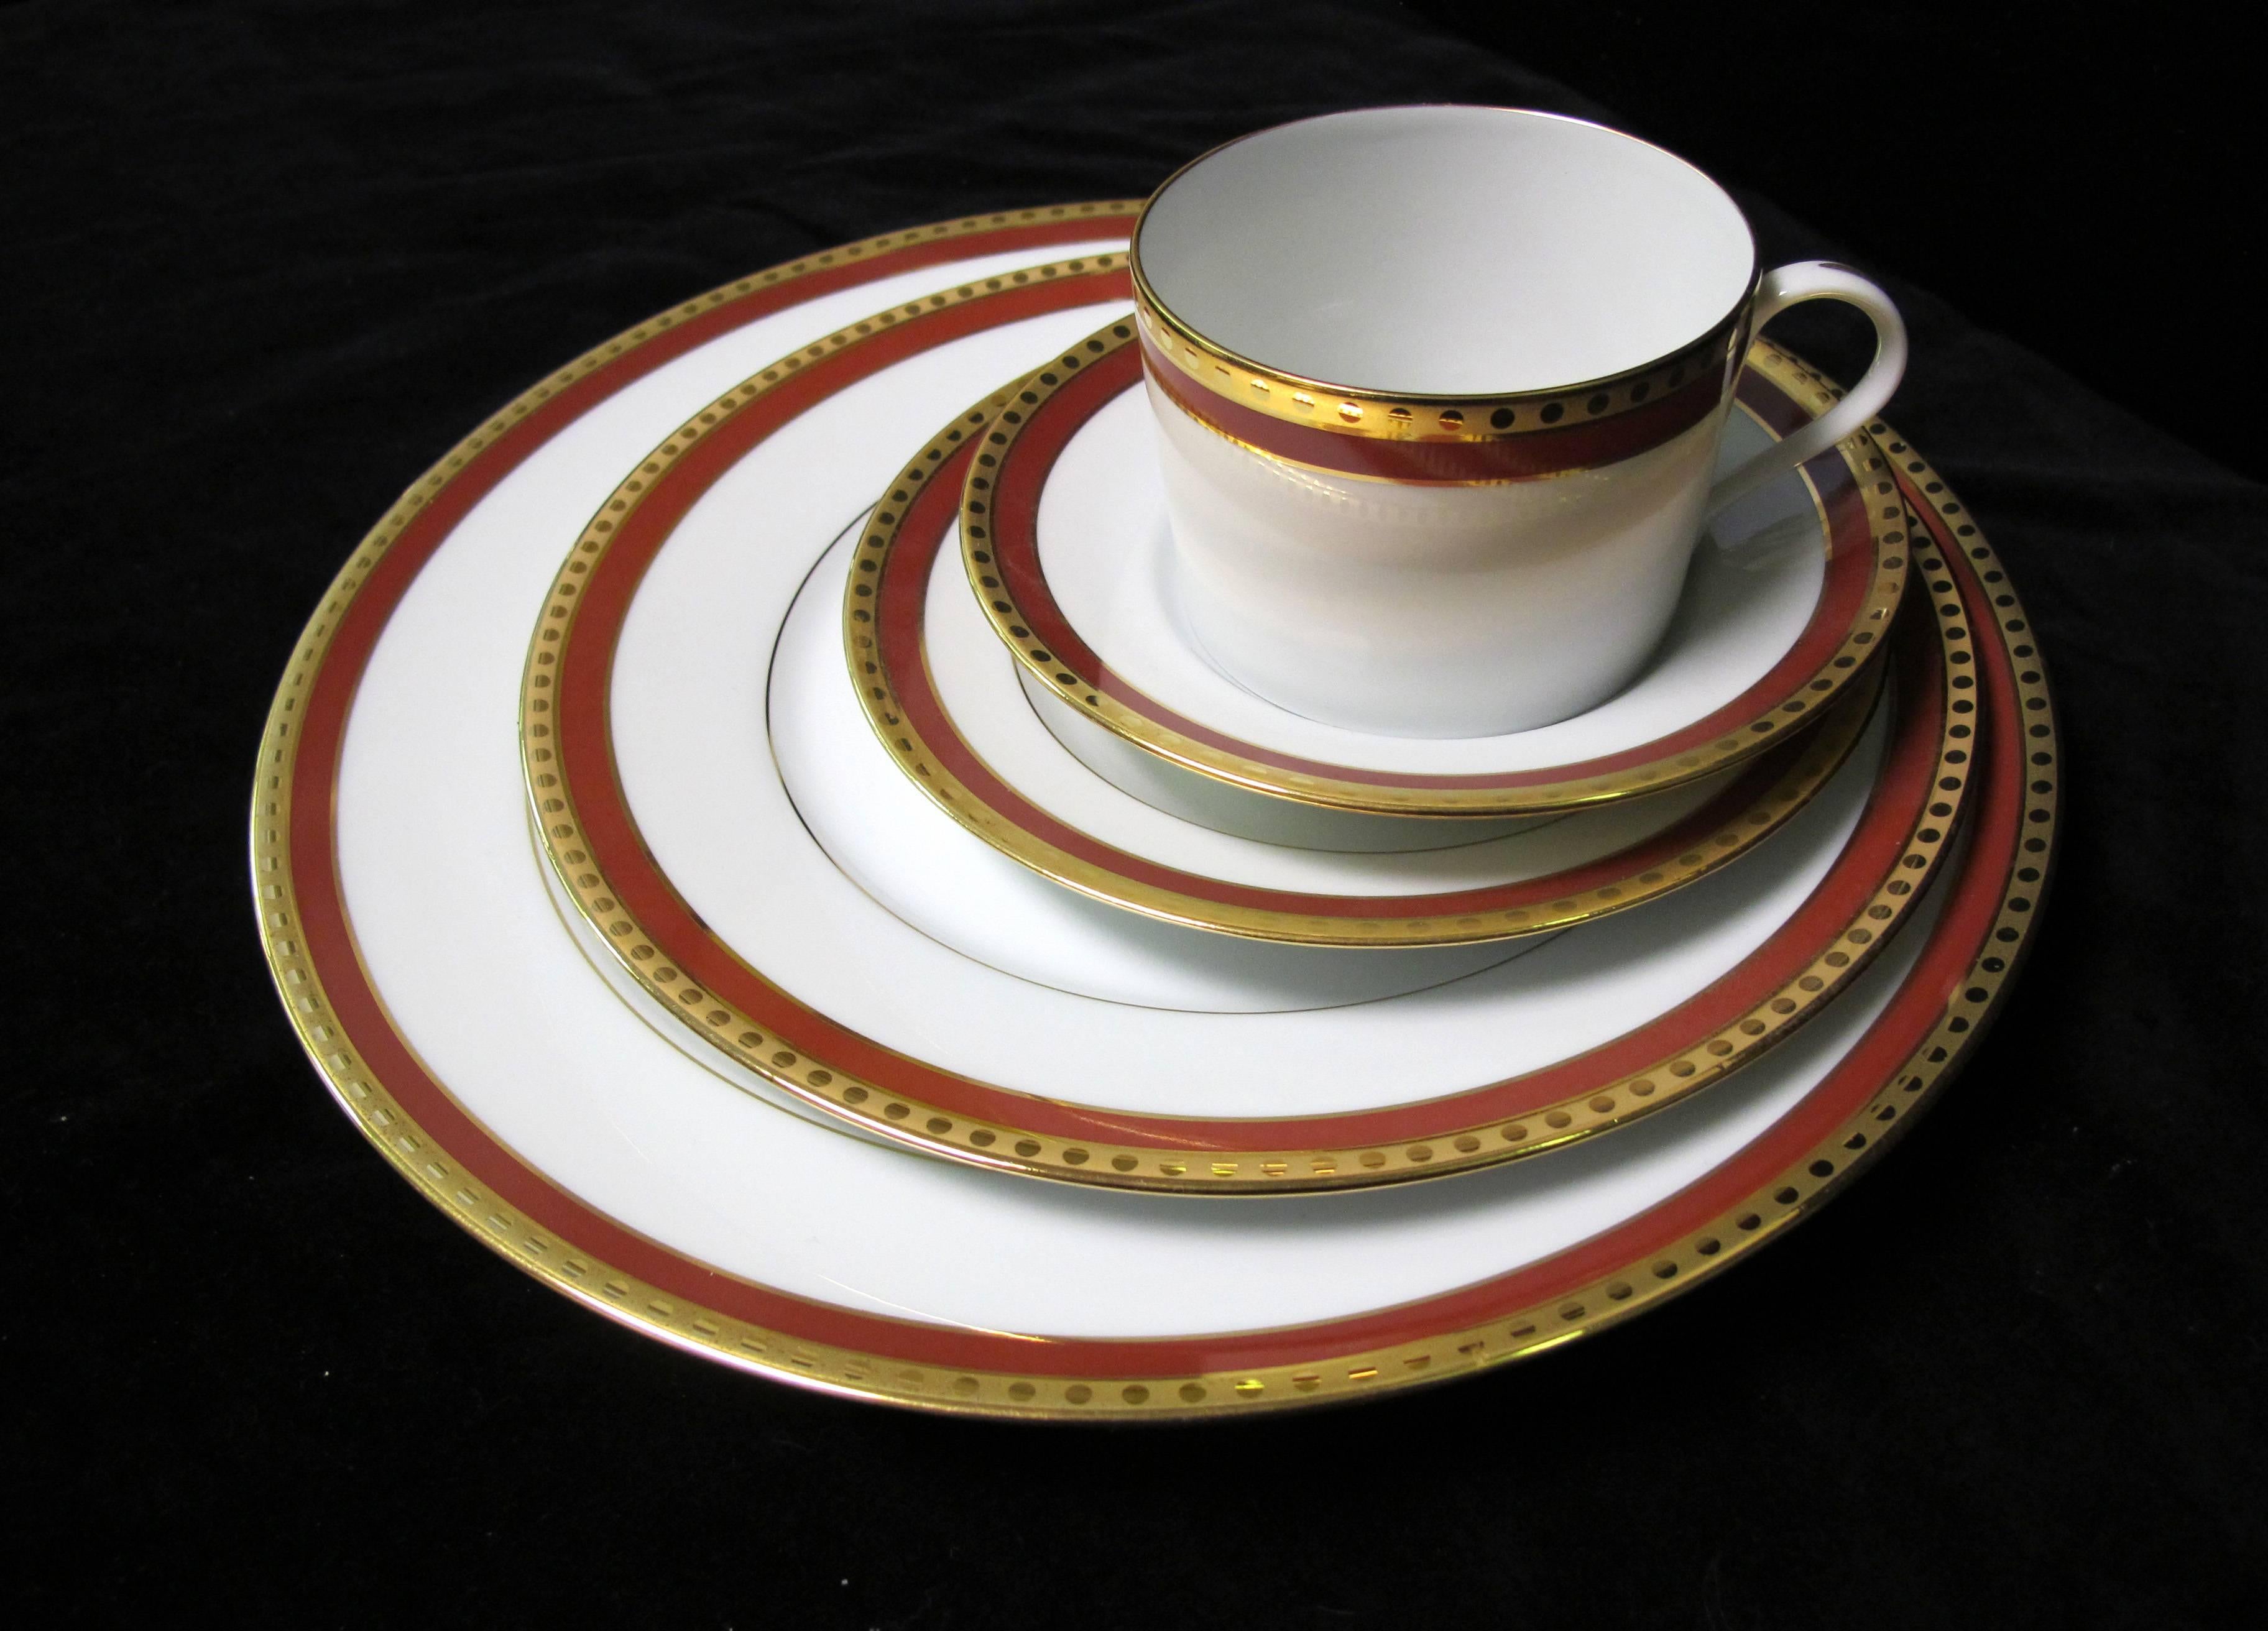 Tiffany & Co. rust band dinner set of five pieces.
There are two complete sets available. They are sold separately. If you are interested in both sets, please contact us.
From largest plate to smallest, the sizes are:
11